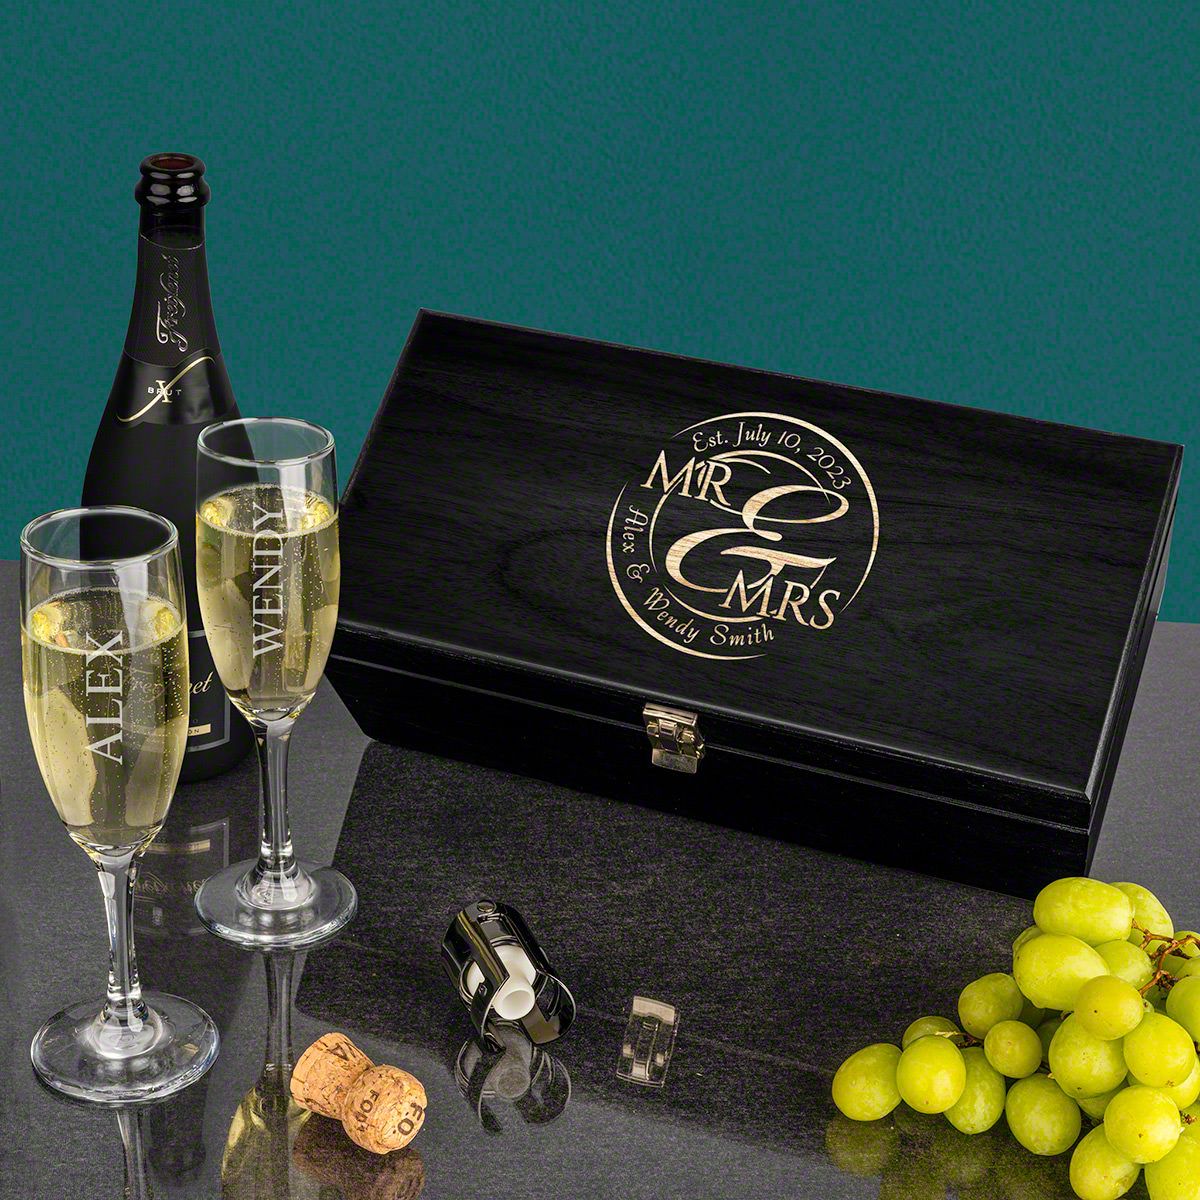 Personalized Champagne Gift When Love Comes Together